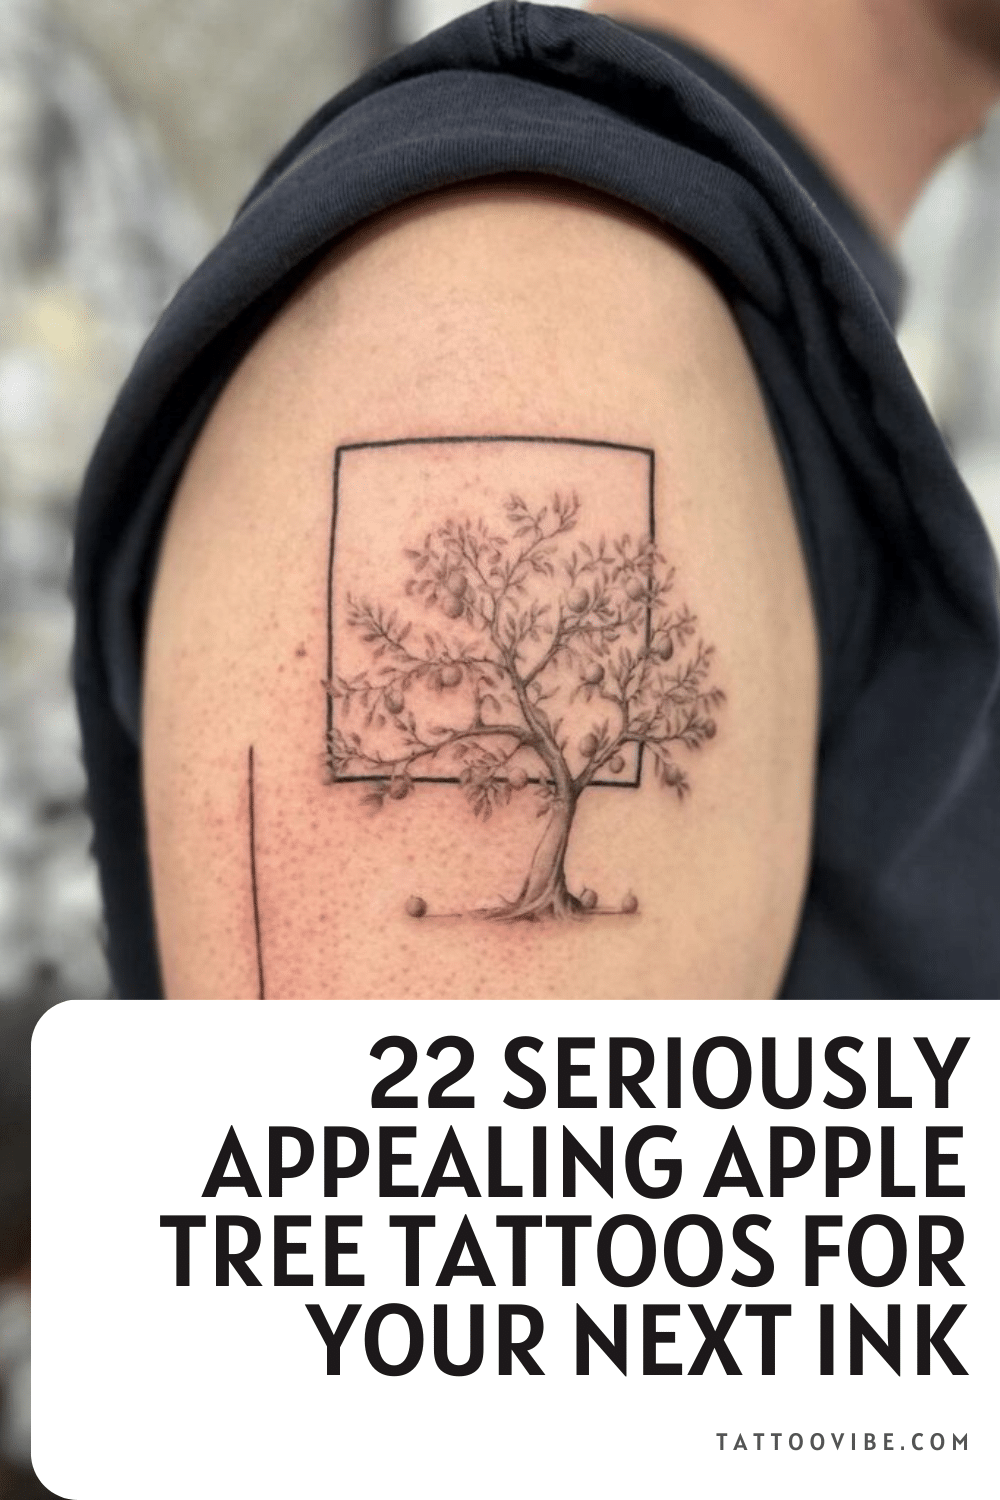 22 Seriously Appealing Apple Tree Tattoos For Your Next Ink